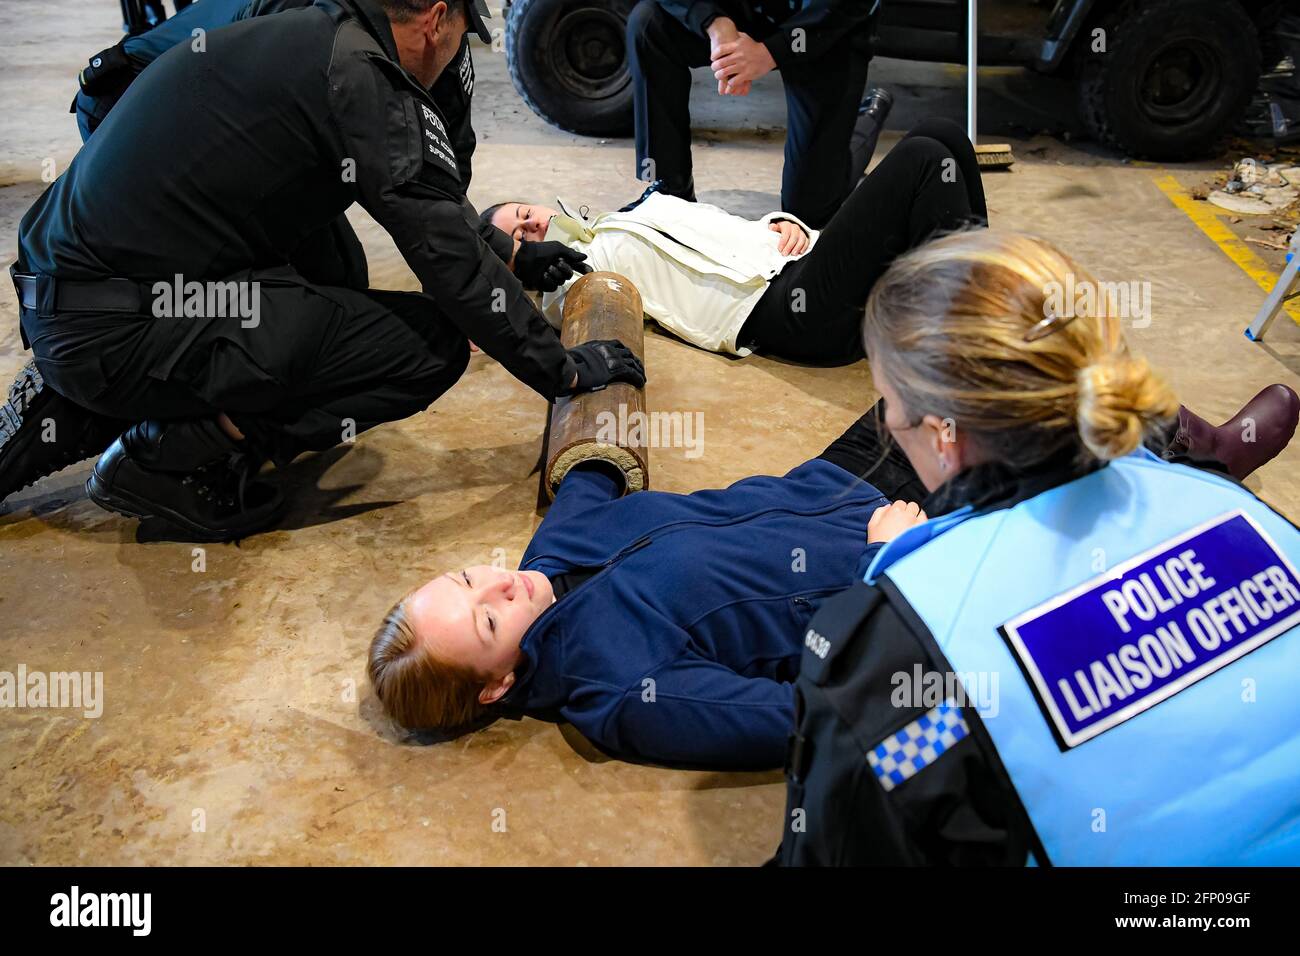 Members of Devon and Cornwall Police Protestor Removal Team and Police Liaison Officers respond to a 'lock-on' training scenario at the force headquarters in Exeter, where they are preparing for the forthcoming G7 Summit in Cornwall. The 'lock-on' tube, often made of plastic, steel and concrete, are used by protestors to lock arms together while causing obstructions or blocking roads and have to be carefully cut free by police after appealing to the protesters to relent their protest. Picture date: Thursday May 20, 2021. Stock Photo